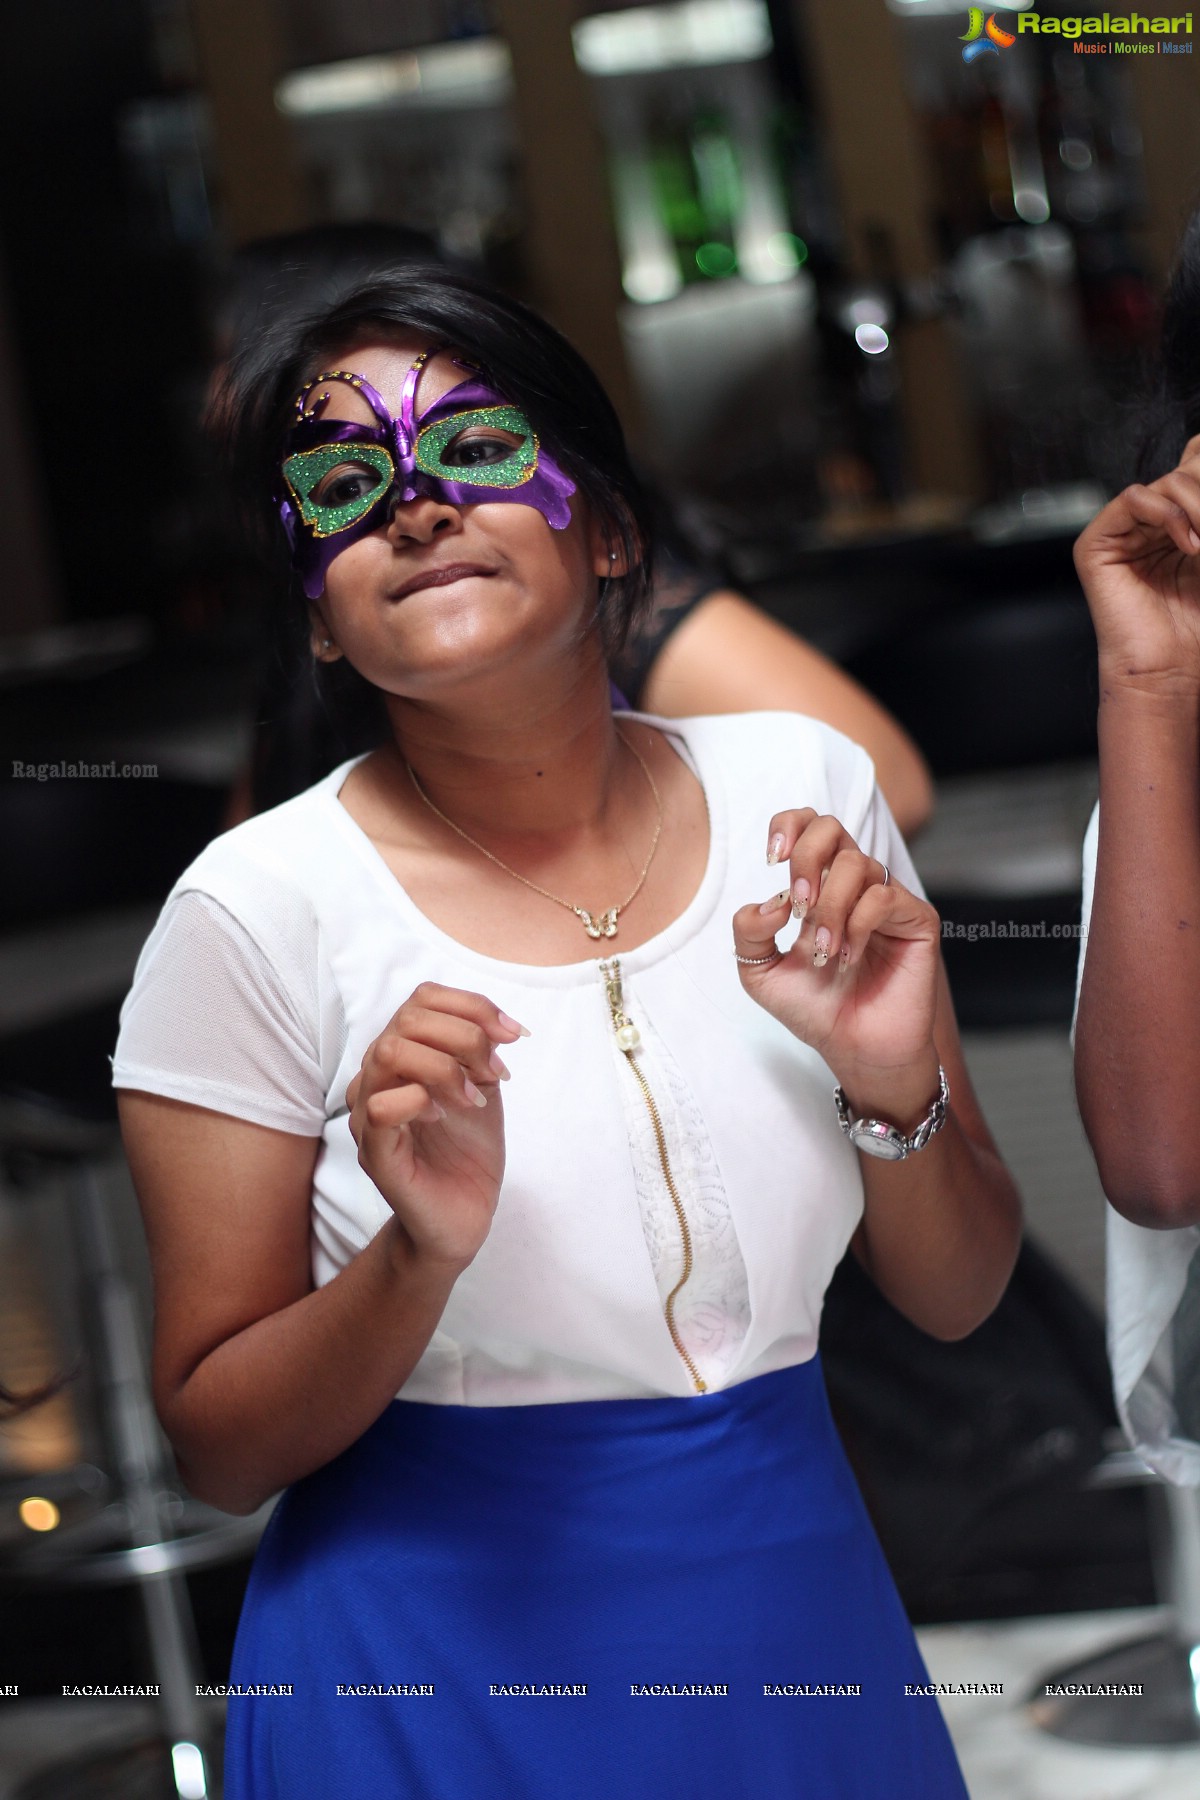 Purple 2.0: The Mask Party in Hyderabad, Tease